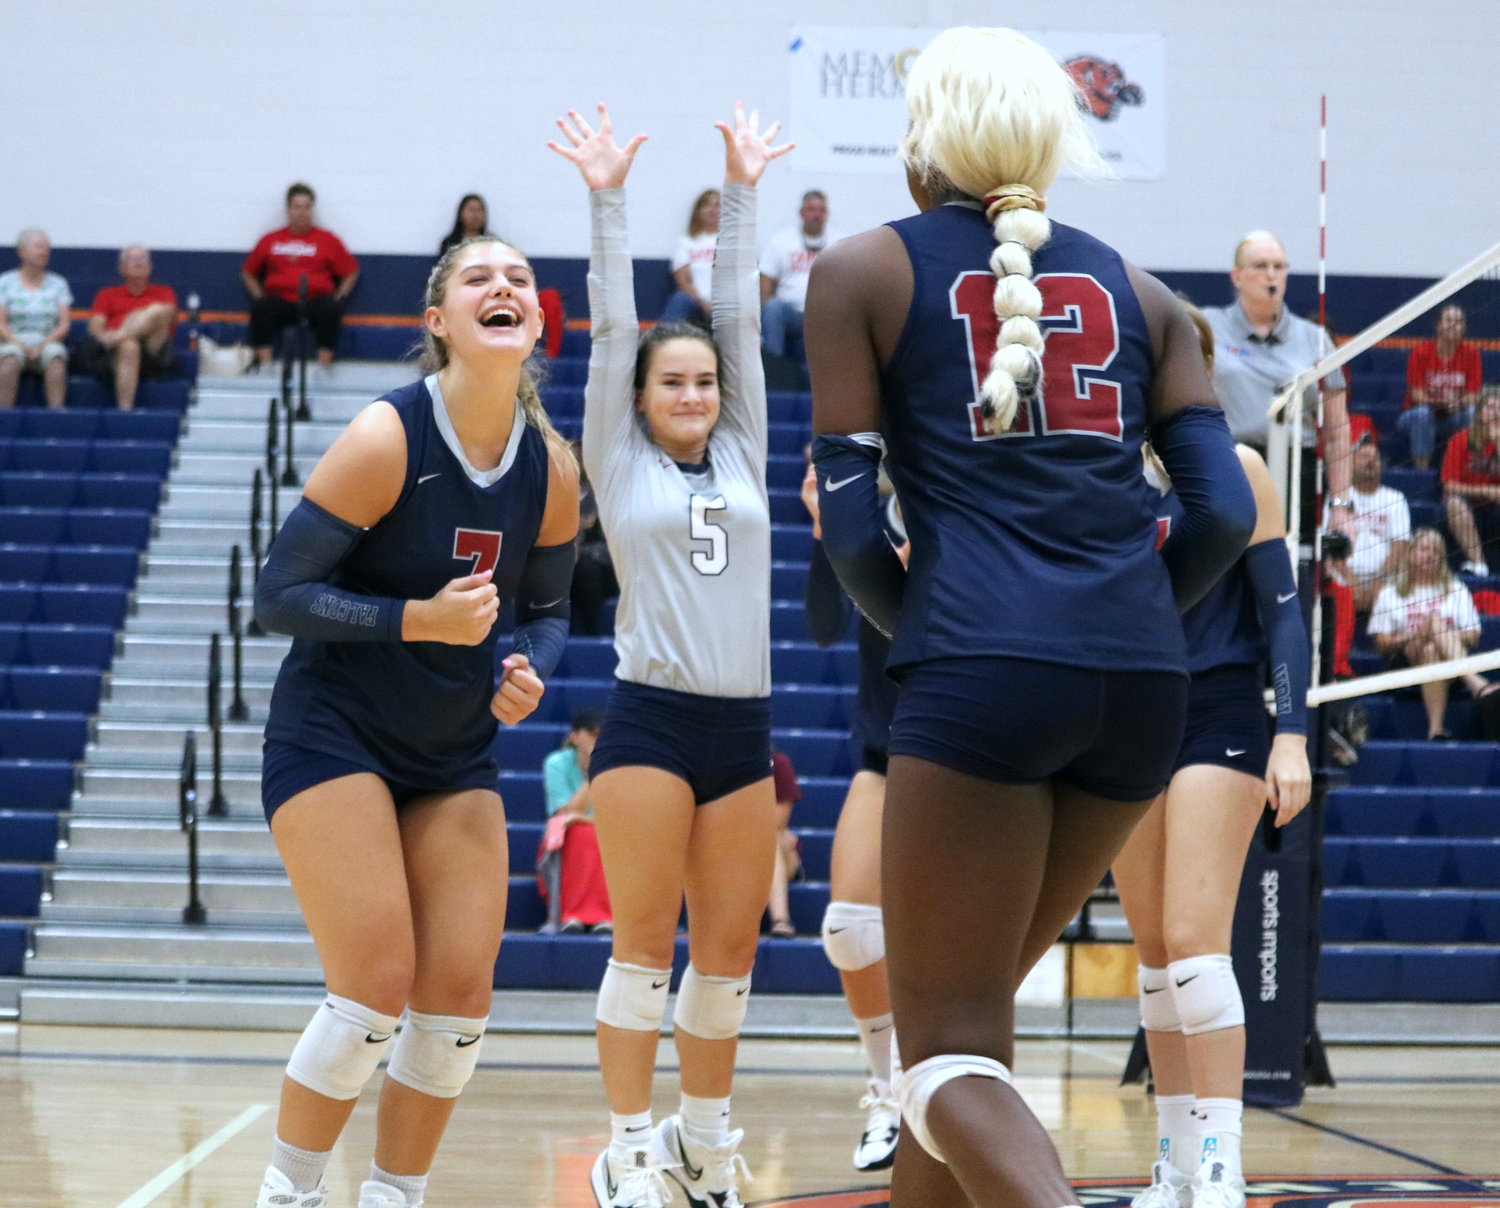 Tompkins players celebrate after winning the second set against Canyon in the finals match of gold bracket Katy ISD/Cy-Fair Tournament at Bridgeland.